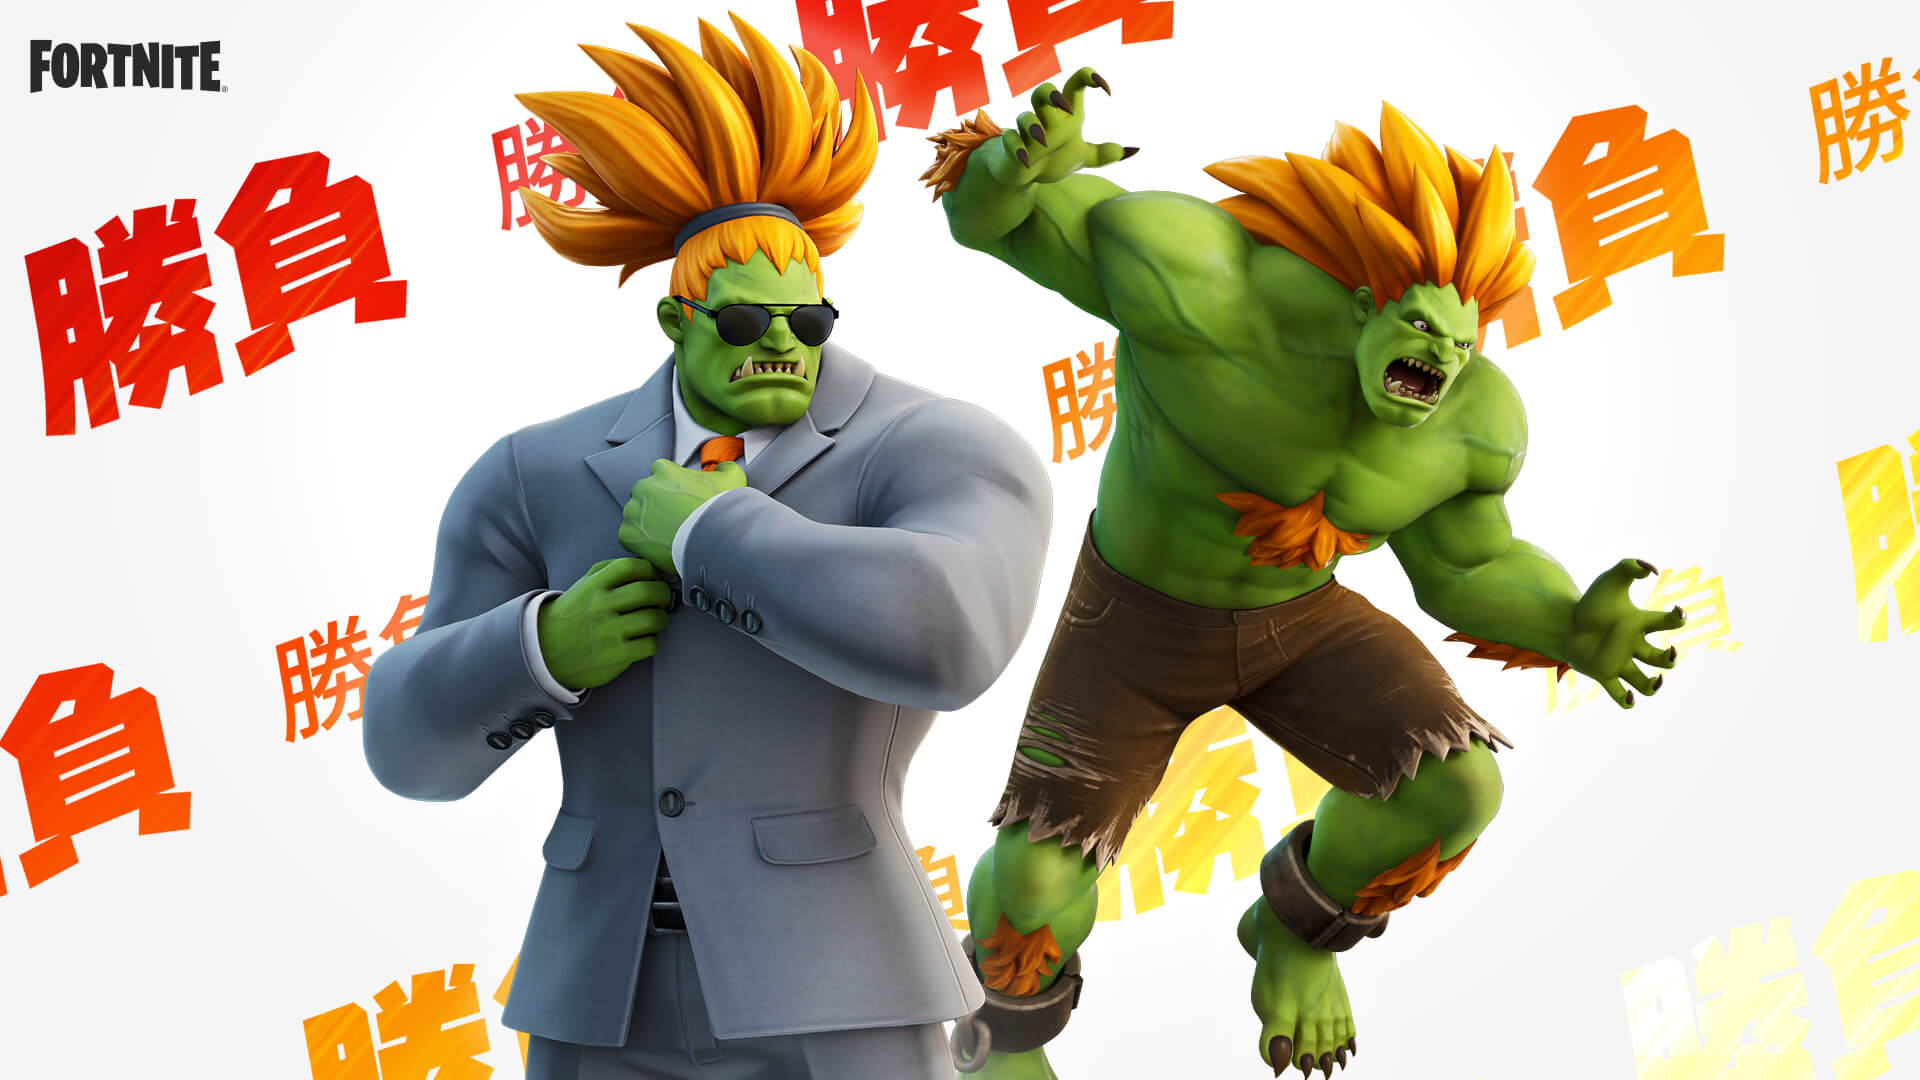 Fortnite Gets Its Best Crossover Yet In Business Suit Blanka